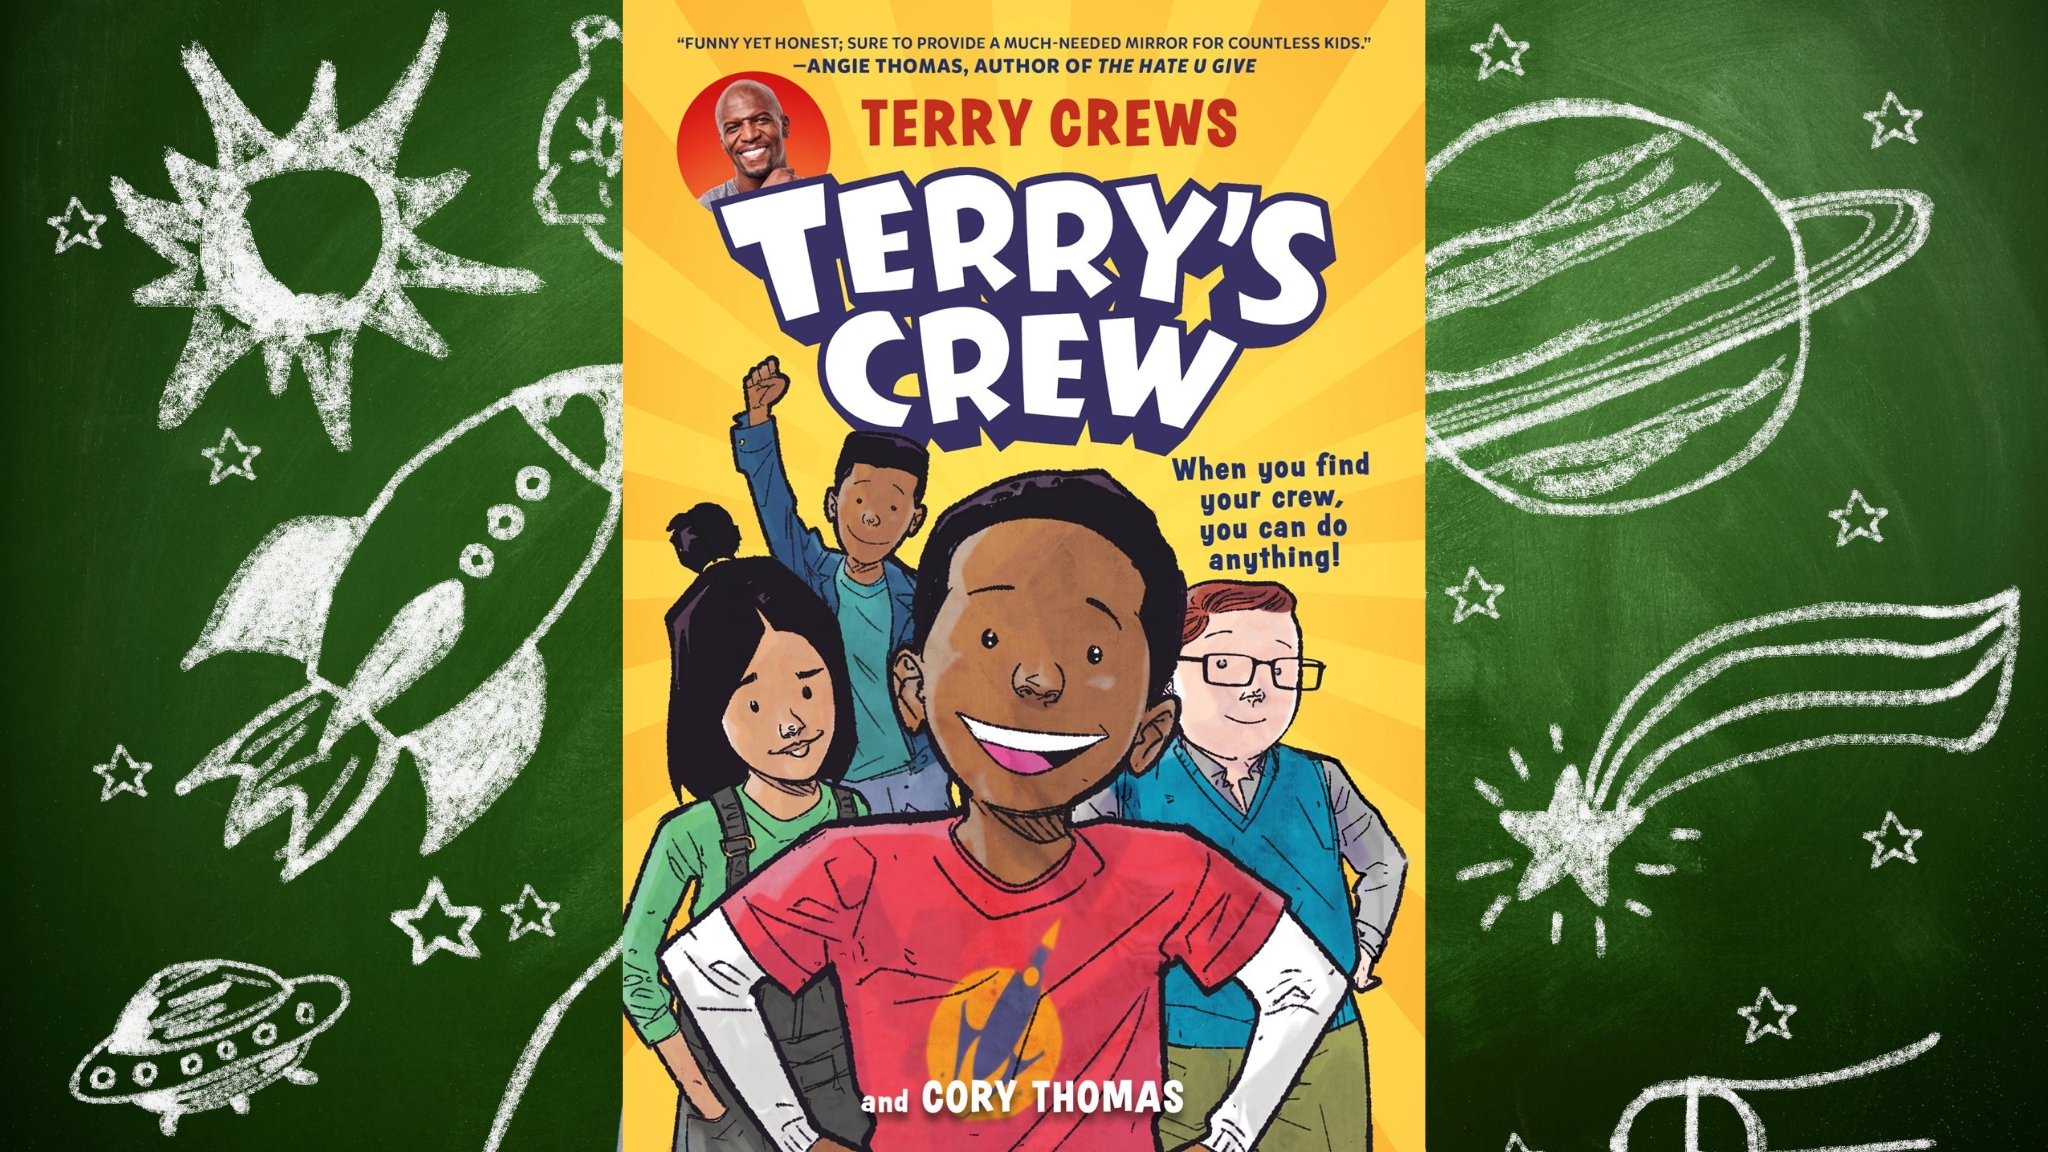 Chase Big Dreams and Find Supportive Friends in “Terry’s Crew”